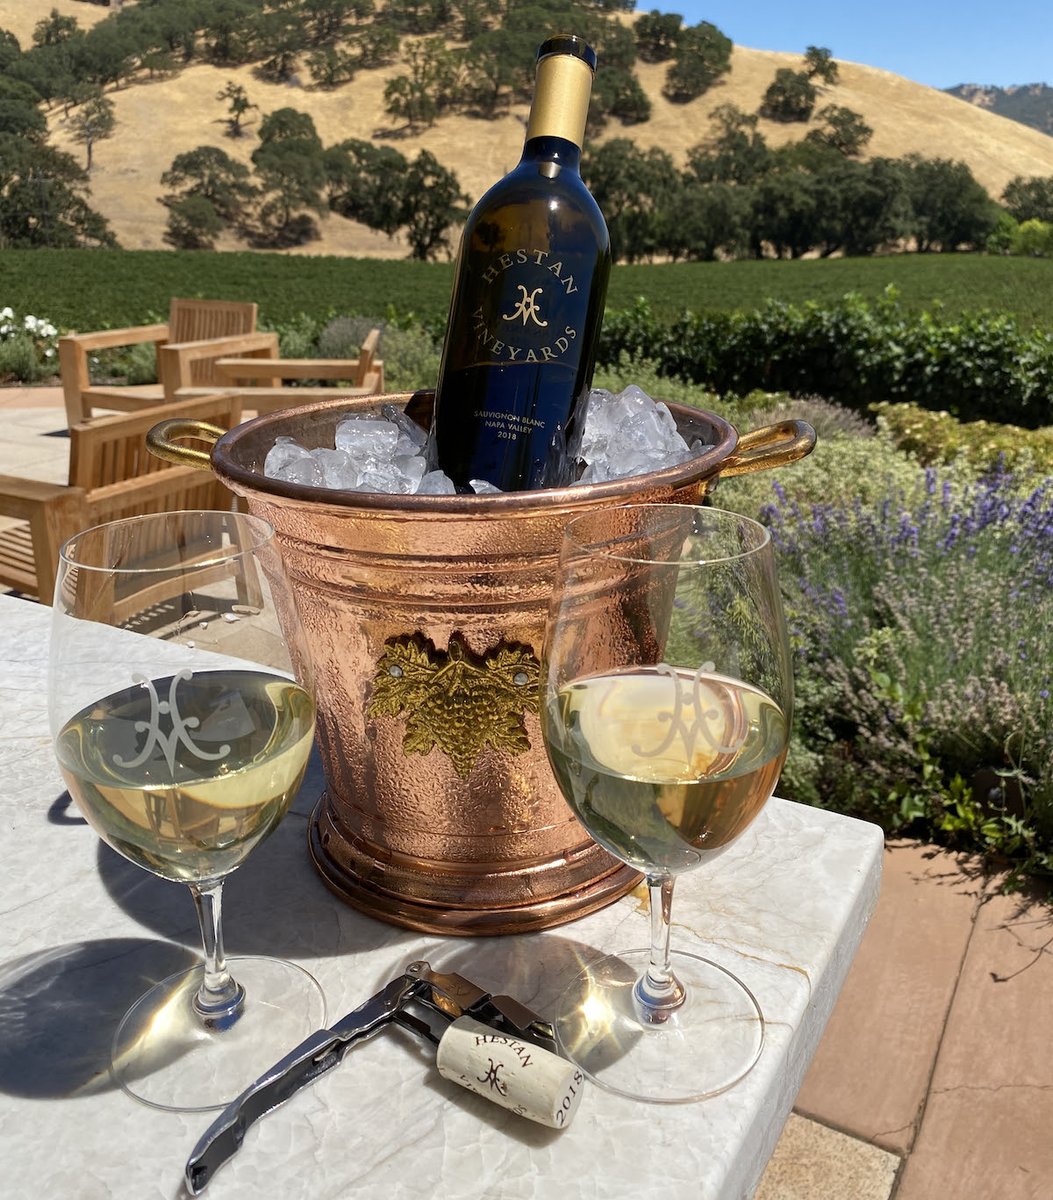 Now that the weather is starting to warm up, you can cool down with our crisp and satisfying Hestan Sauvignon Blanc!
 
Now through Apr. 30th
6 - 11 bottles = $25 flat-rate Ground shipping
12 + bottles = Ground shipping included
Shop Hestan Sauvignon Blanc: t.ly/LRYxx